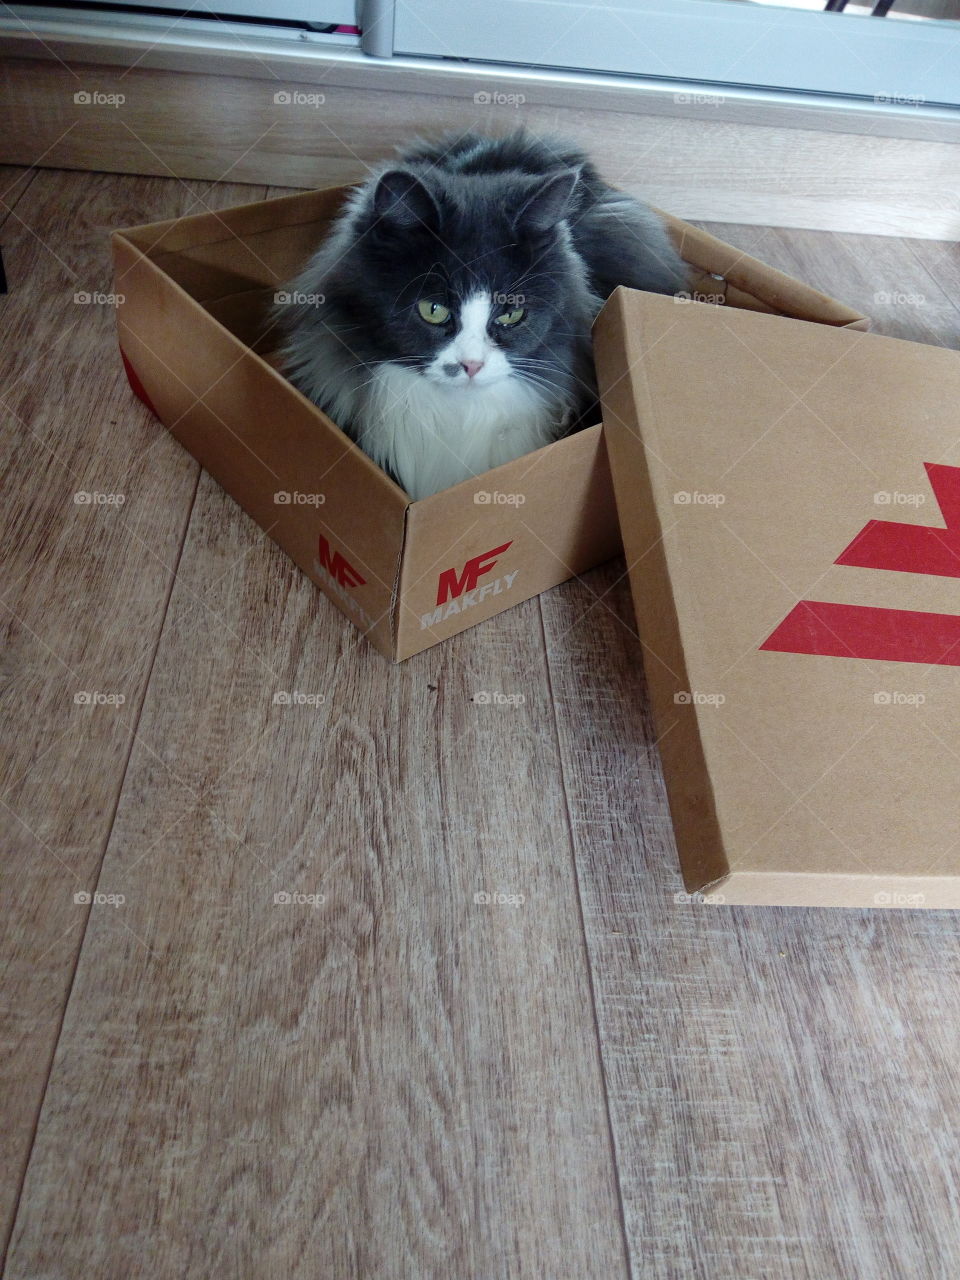 cat in the shoe box. the cat is hiding in the box